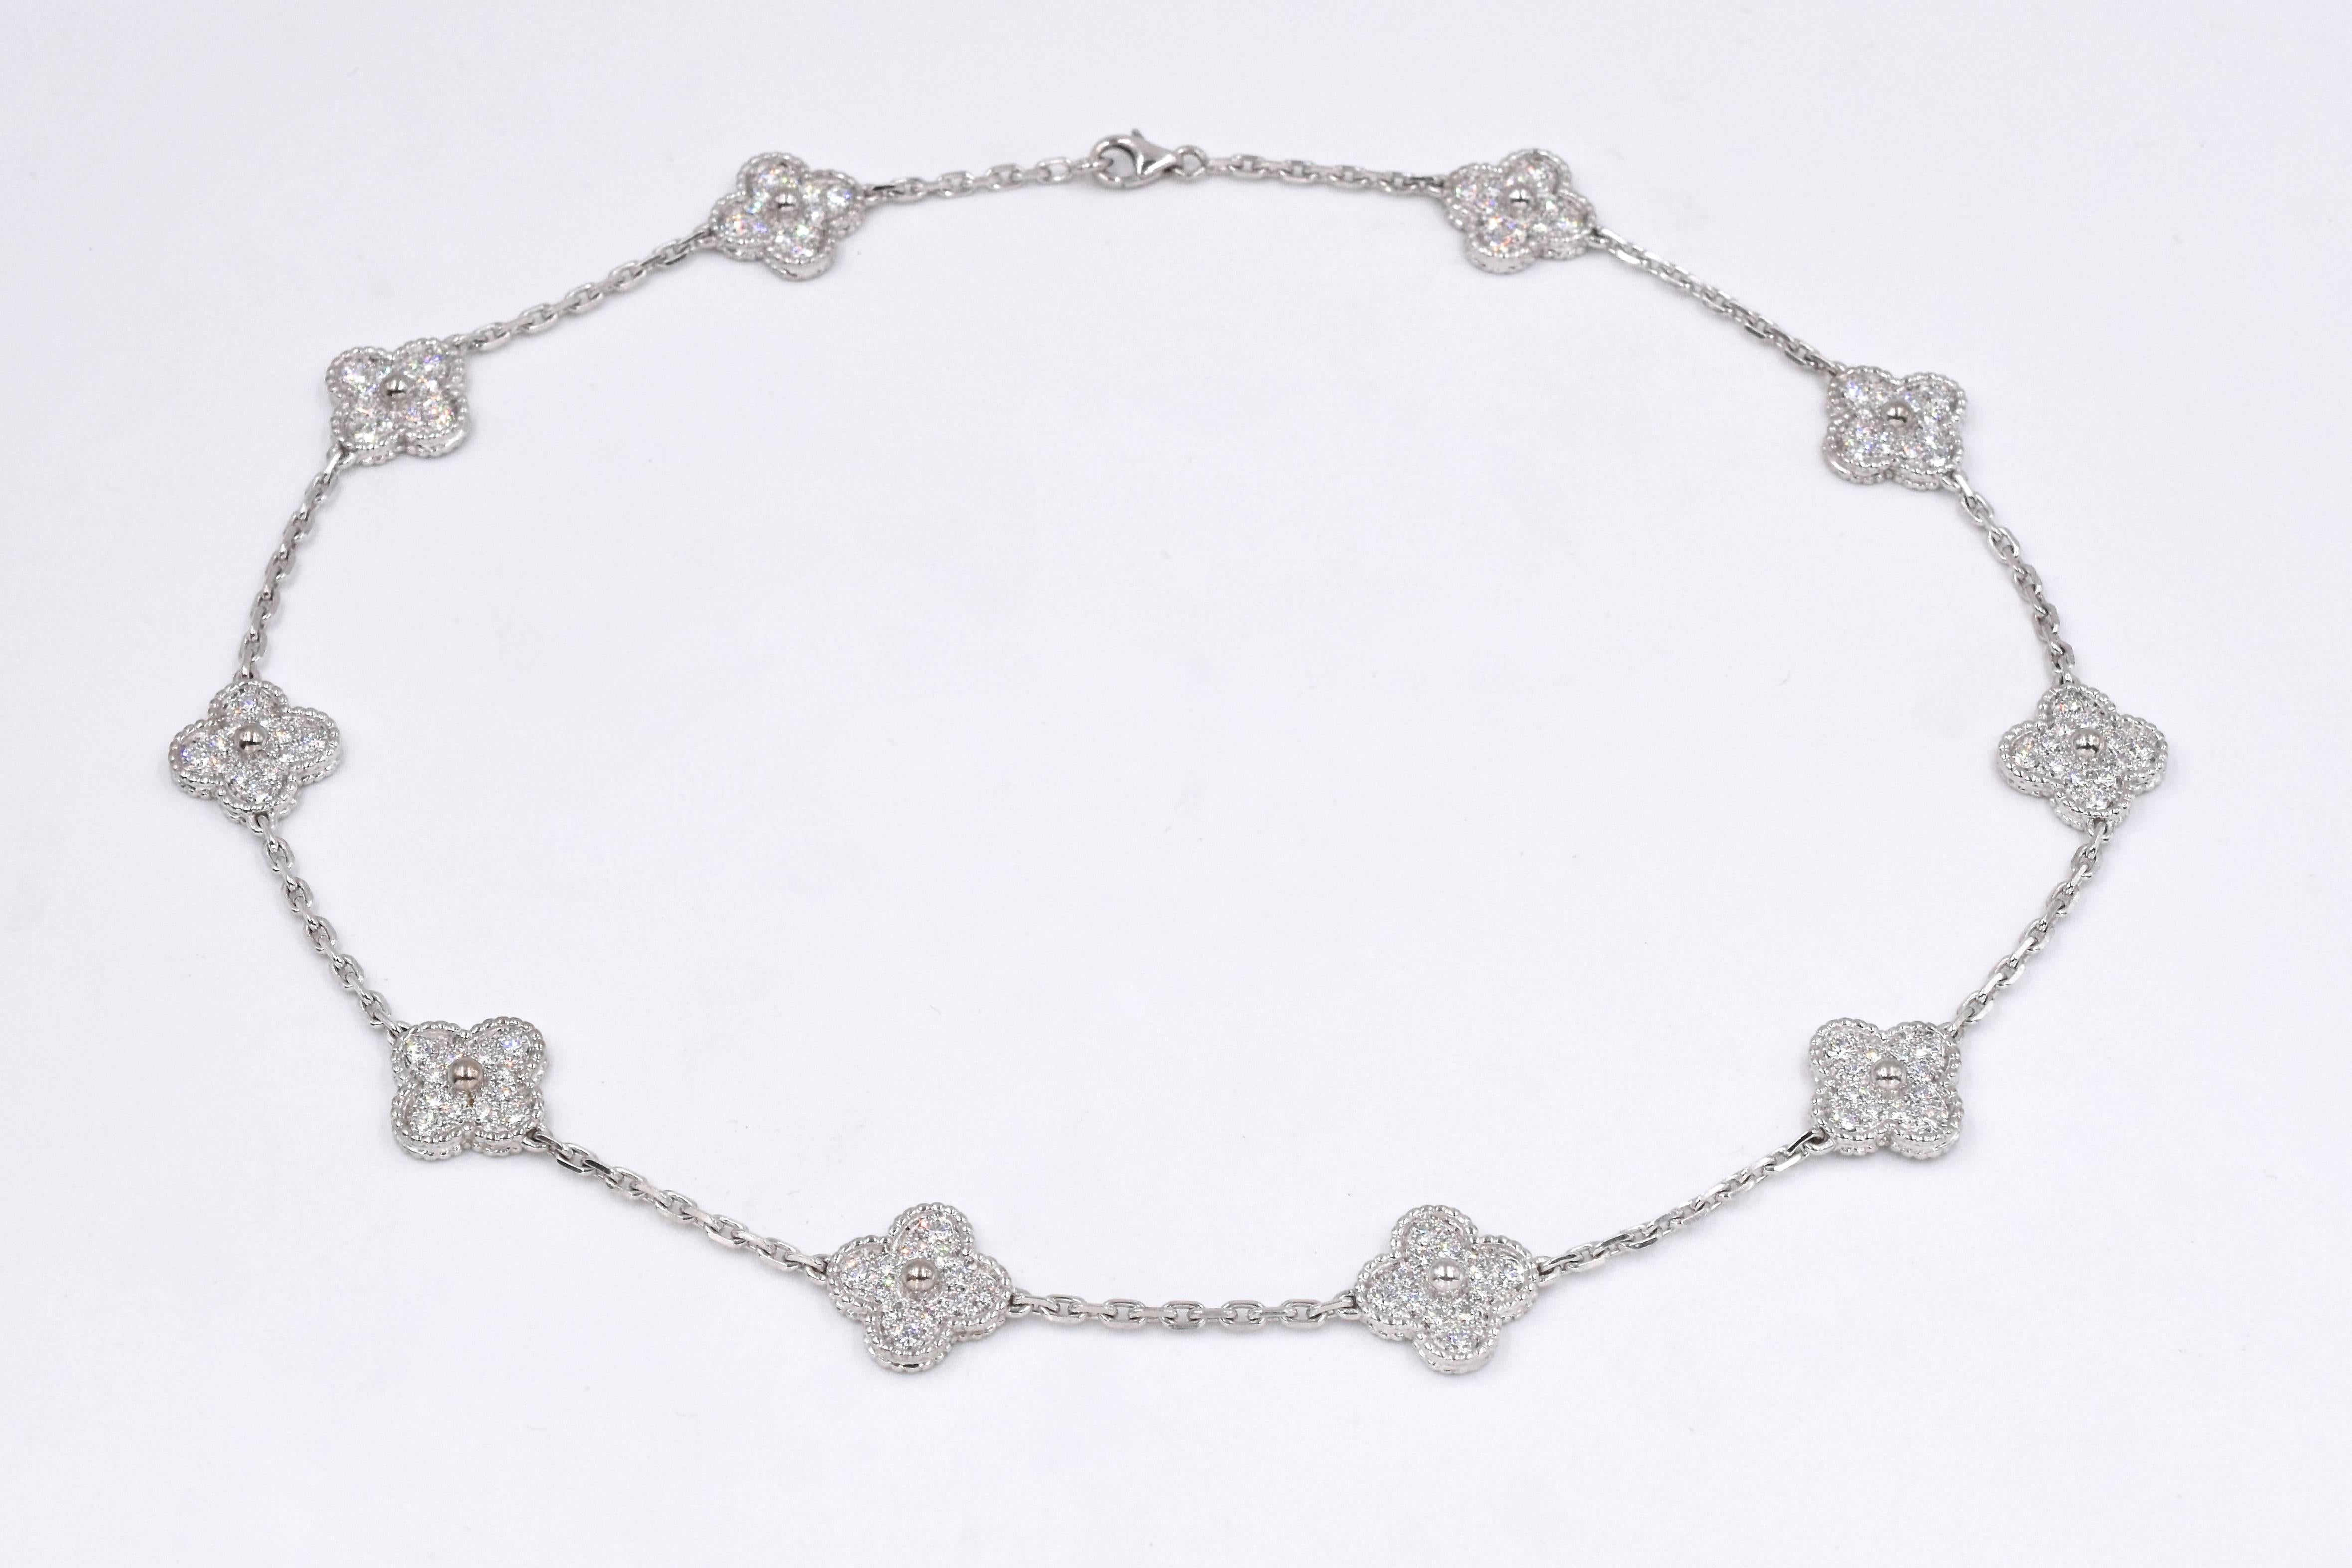 Vintage  V.C.A. Alhambra Diamond Necklace with  10 motif 
Signed V.C.A. stamped 750, and No. BL169460. Length 16” 
( The necklace retails for $53.500 plus tax)

Vintage V.C.A .Alhambra Diamond Earrings with 24 diamonds 
measurements  20mm x